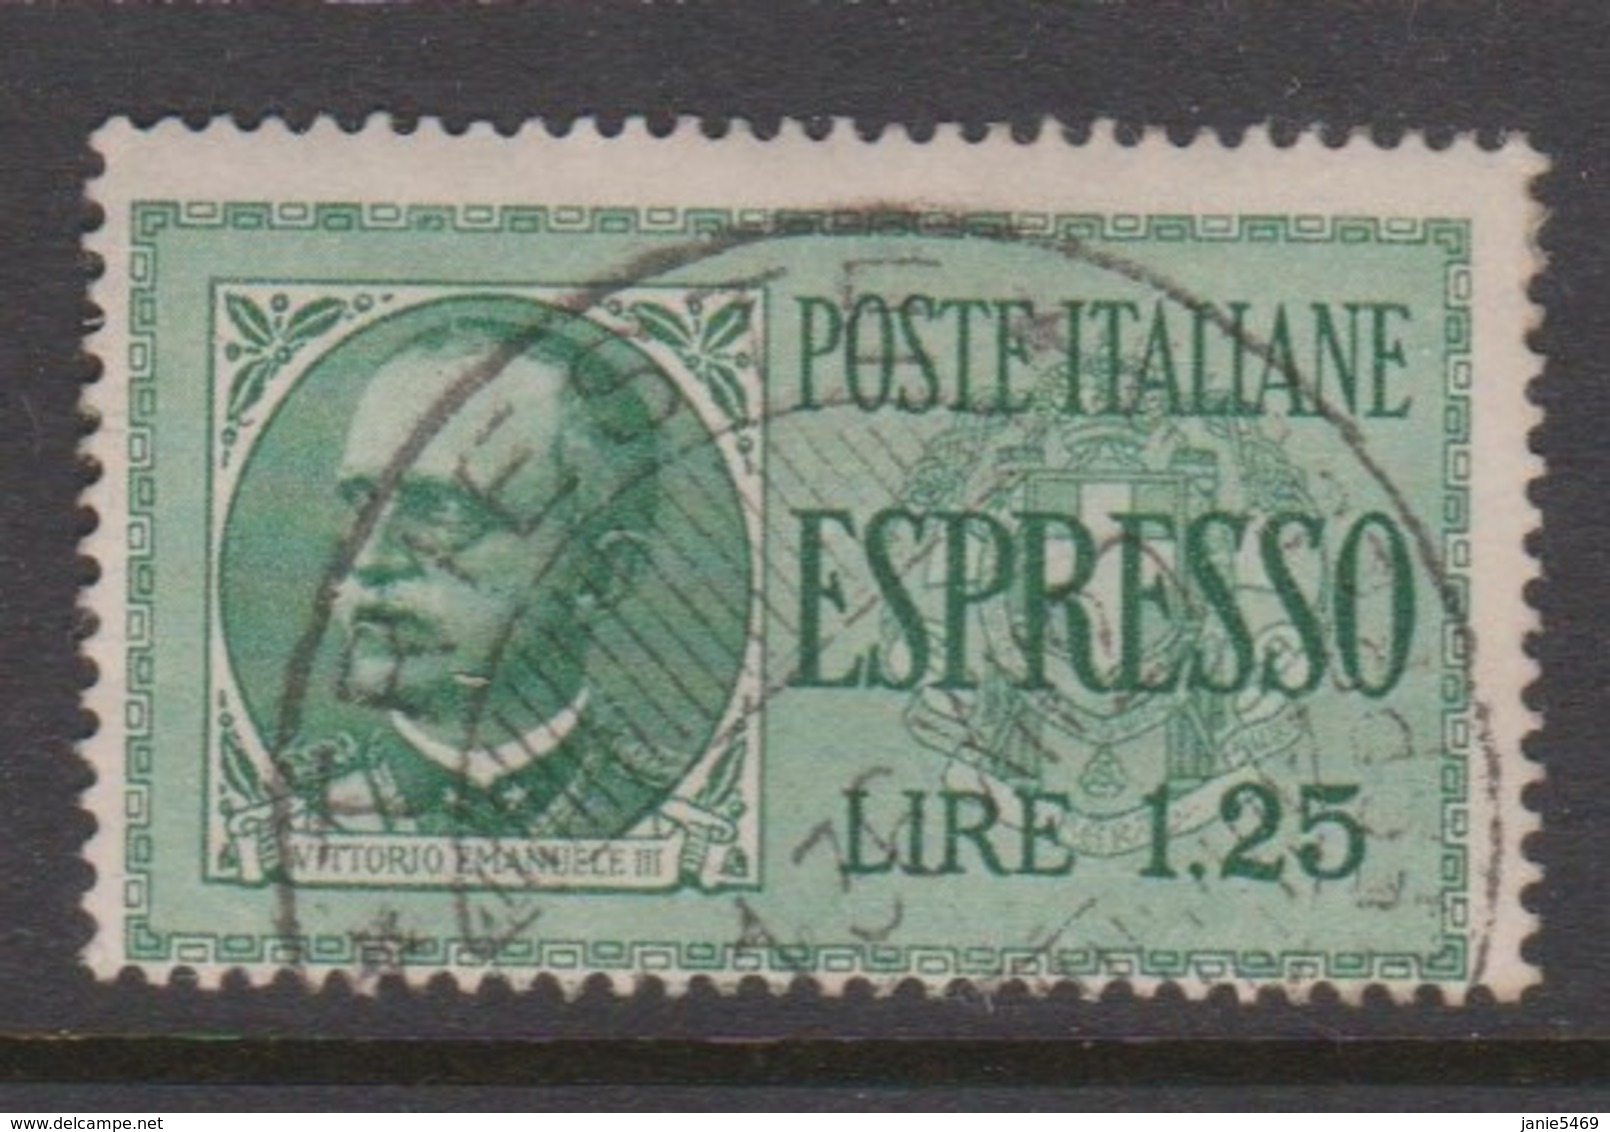 Italy E 15 1932 Special Delivery Stamp,lire 1,25 Green,used - Express Mail